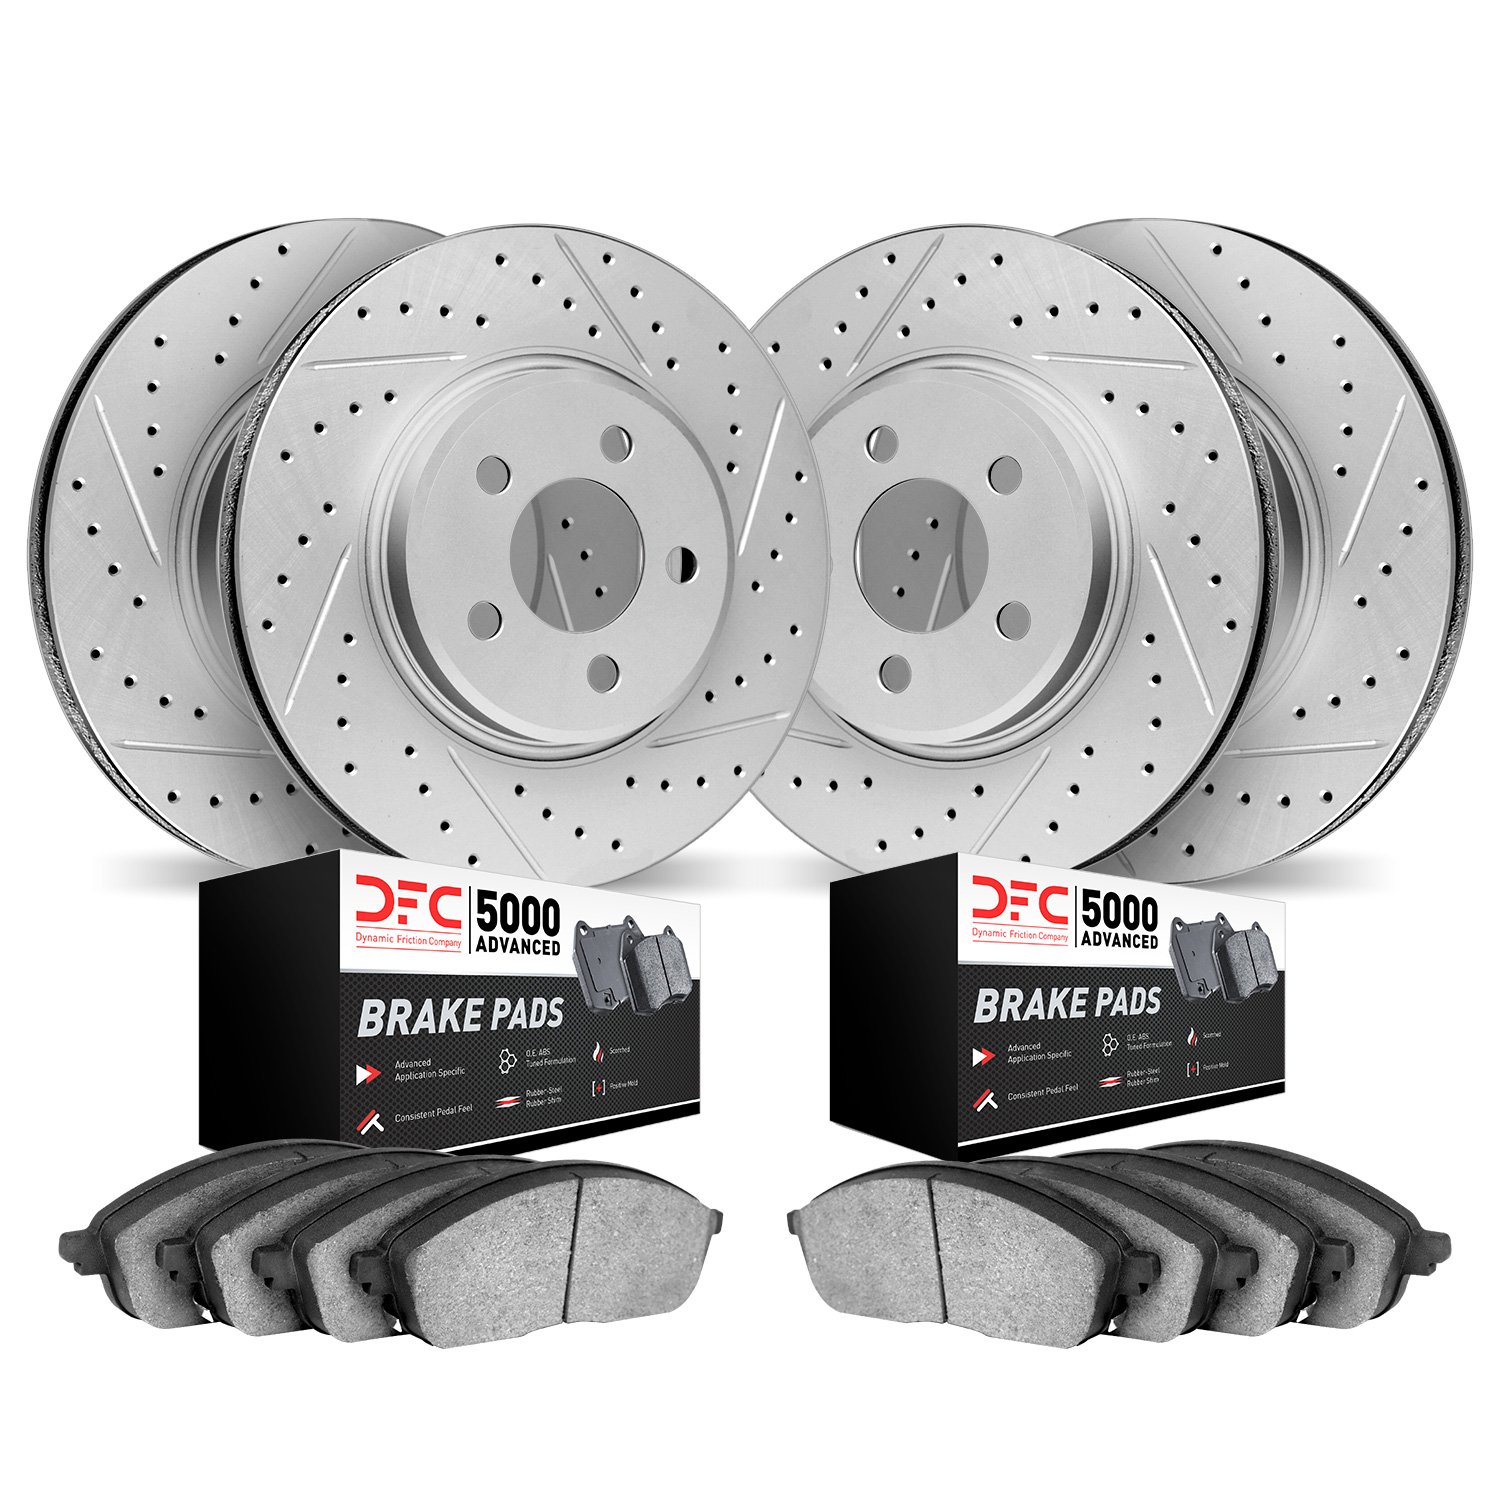 2504-75000 Geoperformance Drilled/Slotted Rotors w/5000 Advanced Brake Pads Kit, 1993-1997 Lexus/Toyota/Scion, Position: Front a